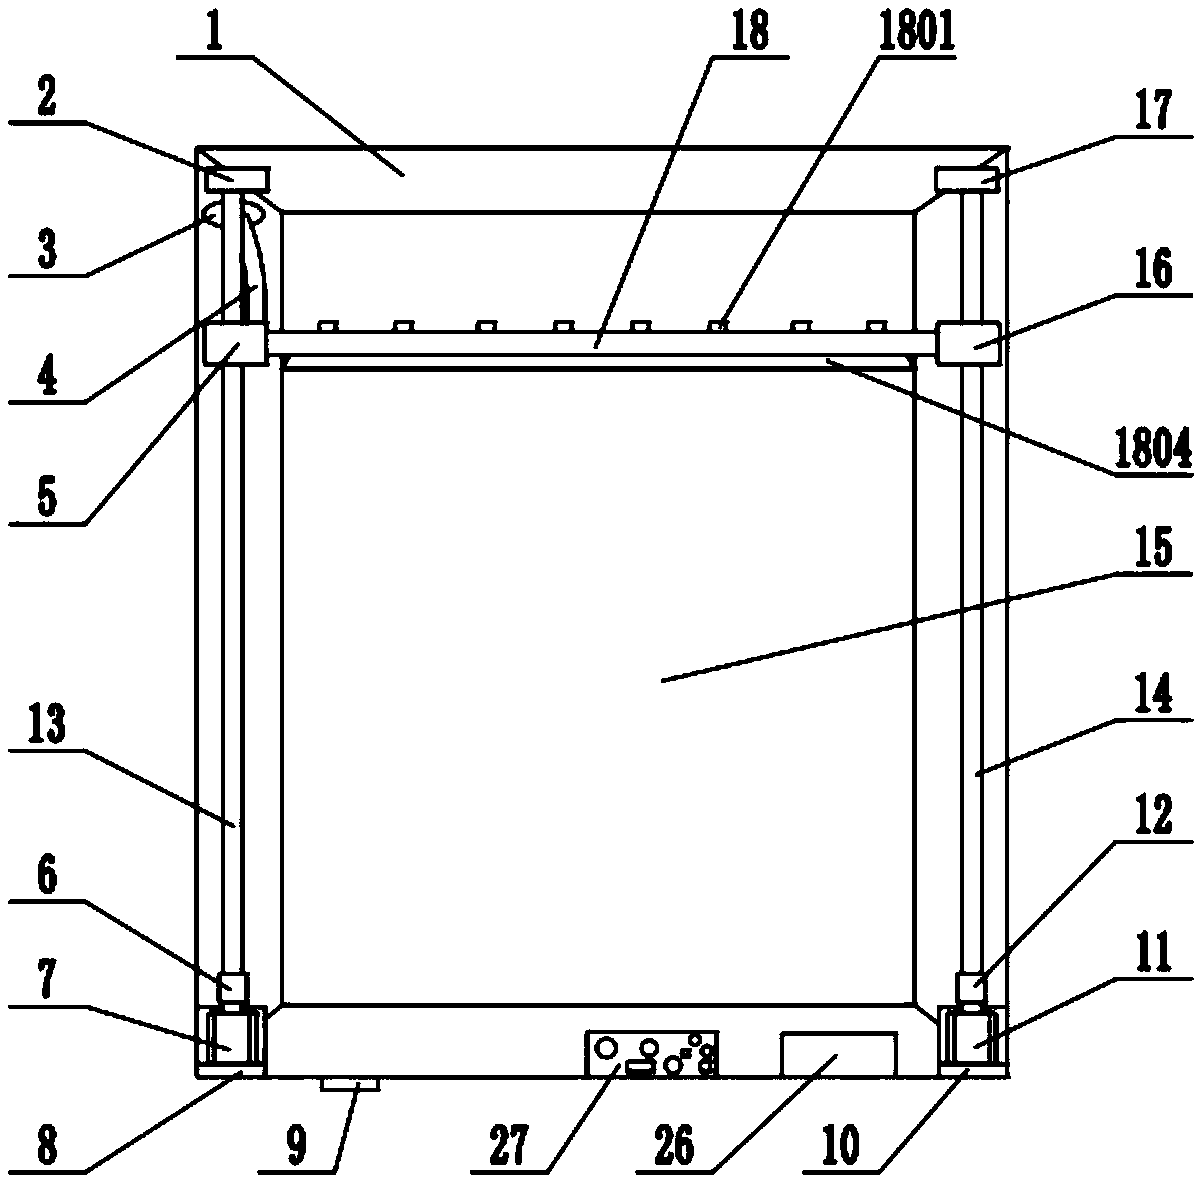 Device for automatically cleaning glass of glass window